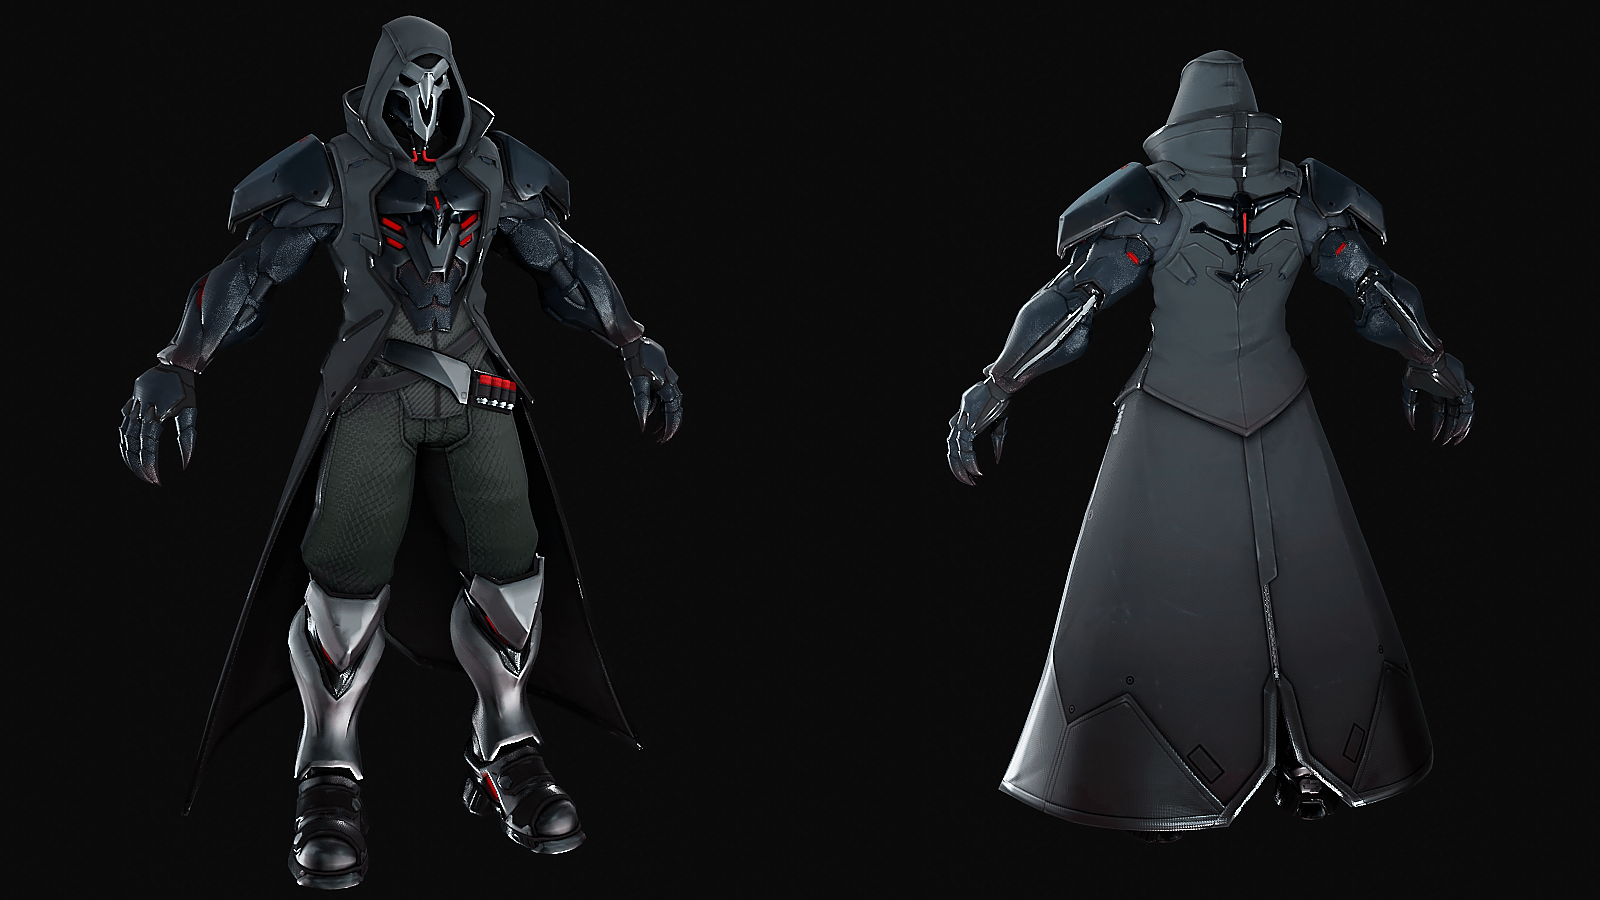 Overwatch 2 - Reaper by WhiteMageSunny on DeviantArt